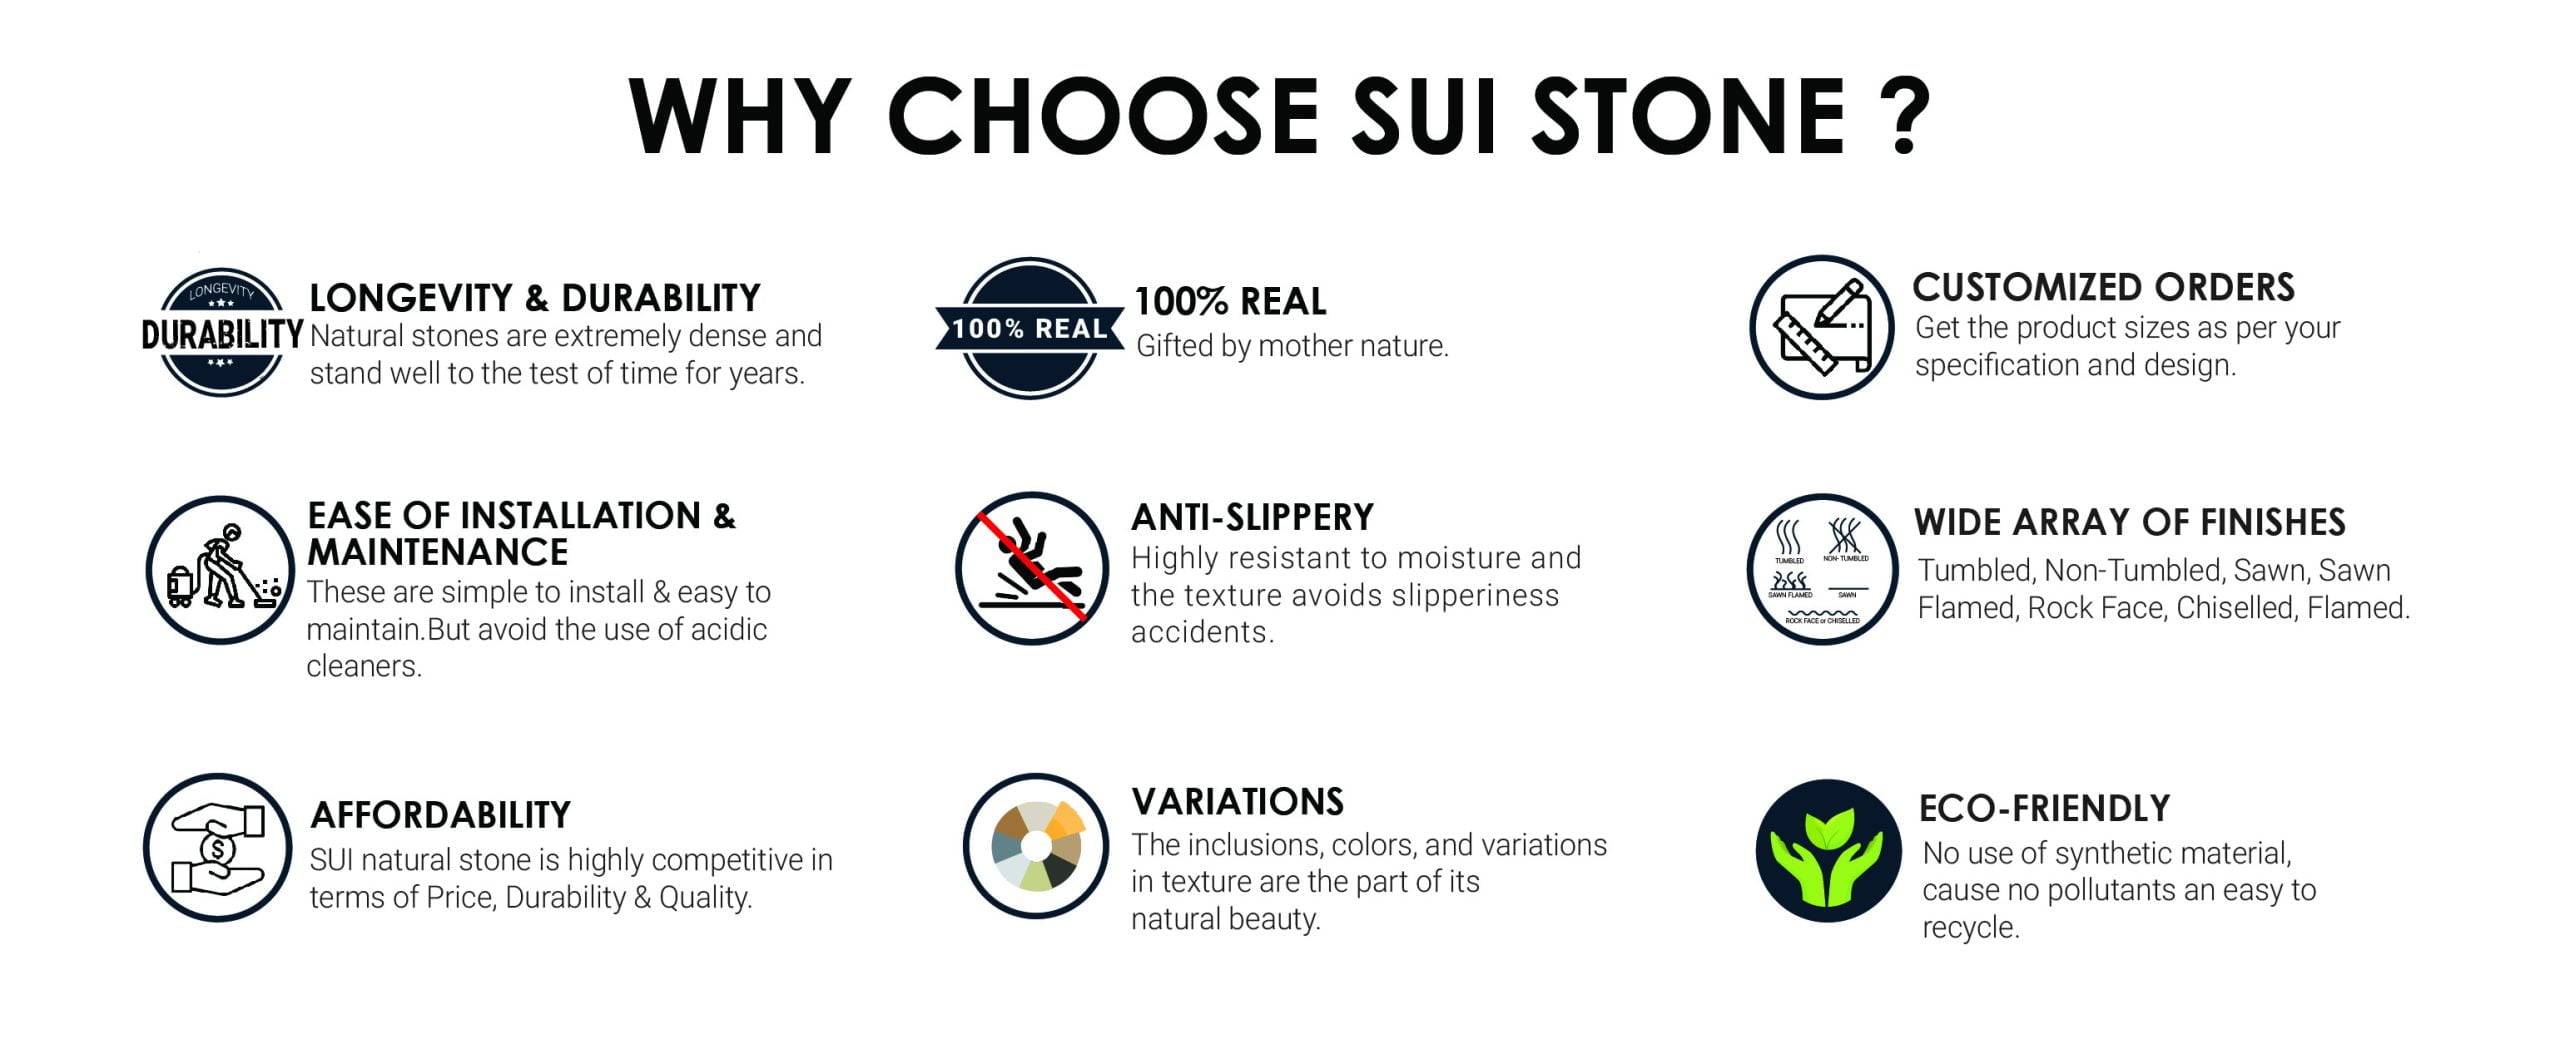 About SUi stone